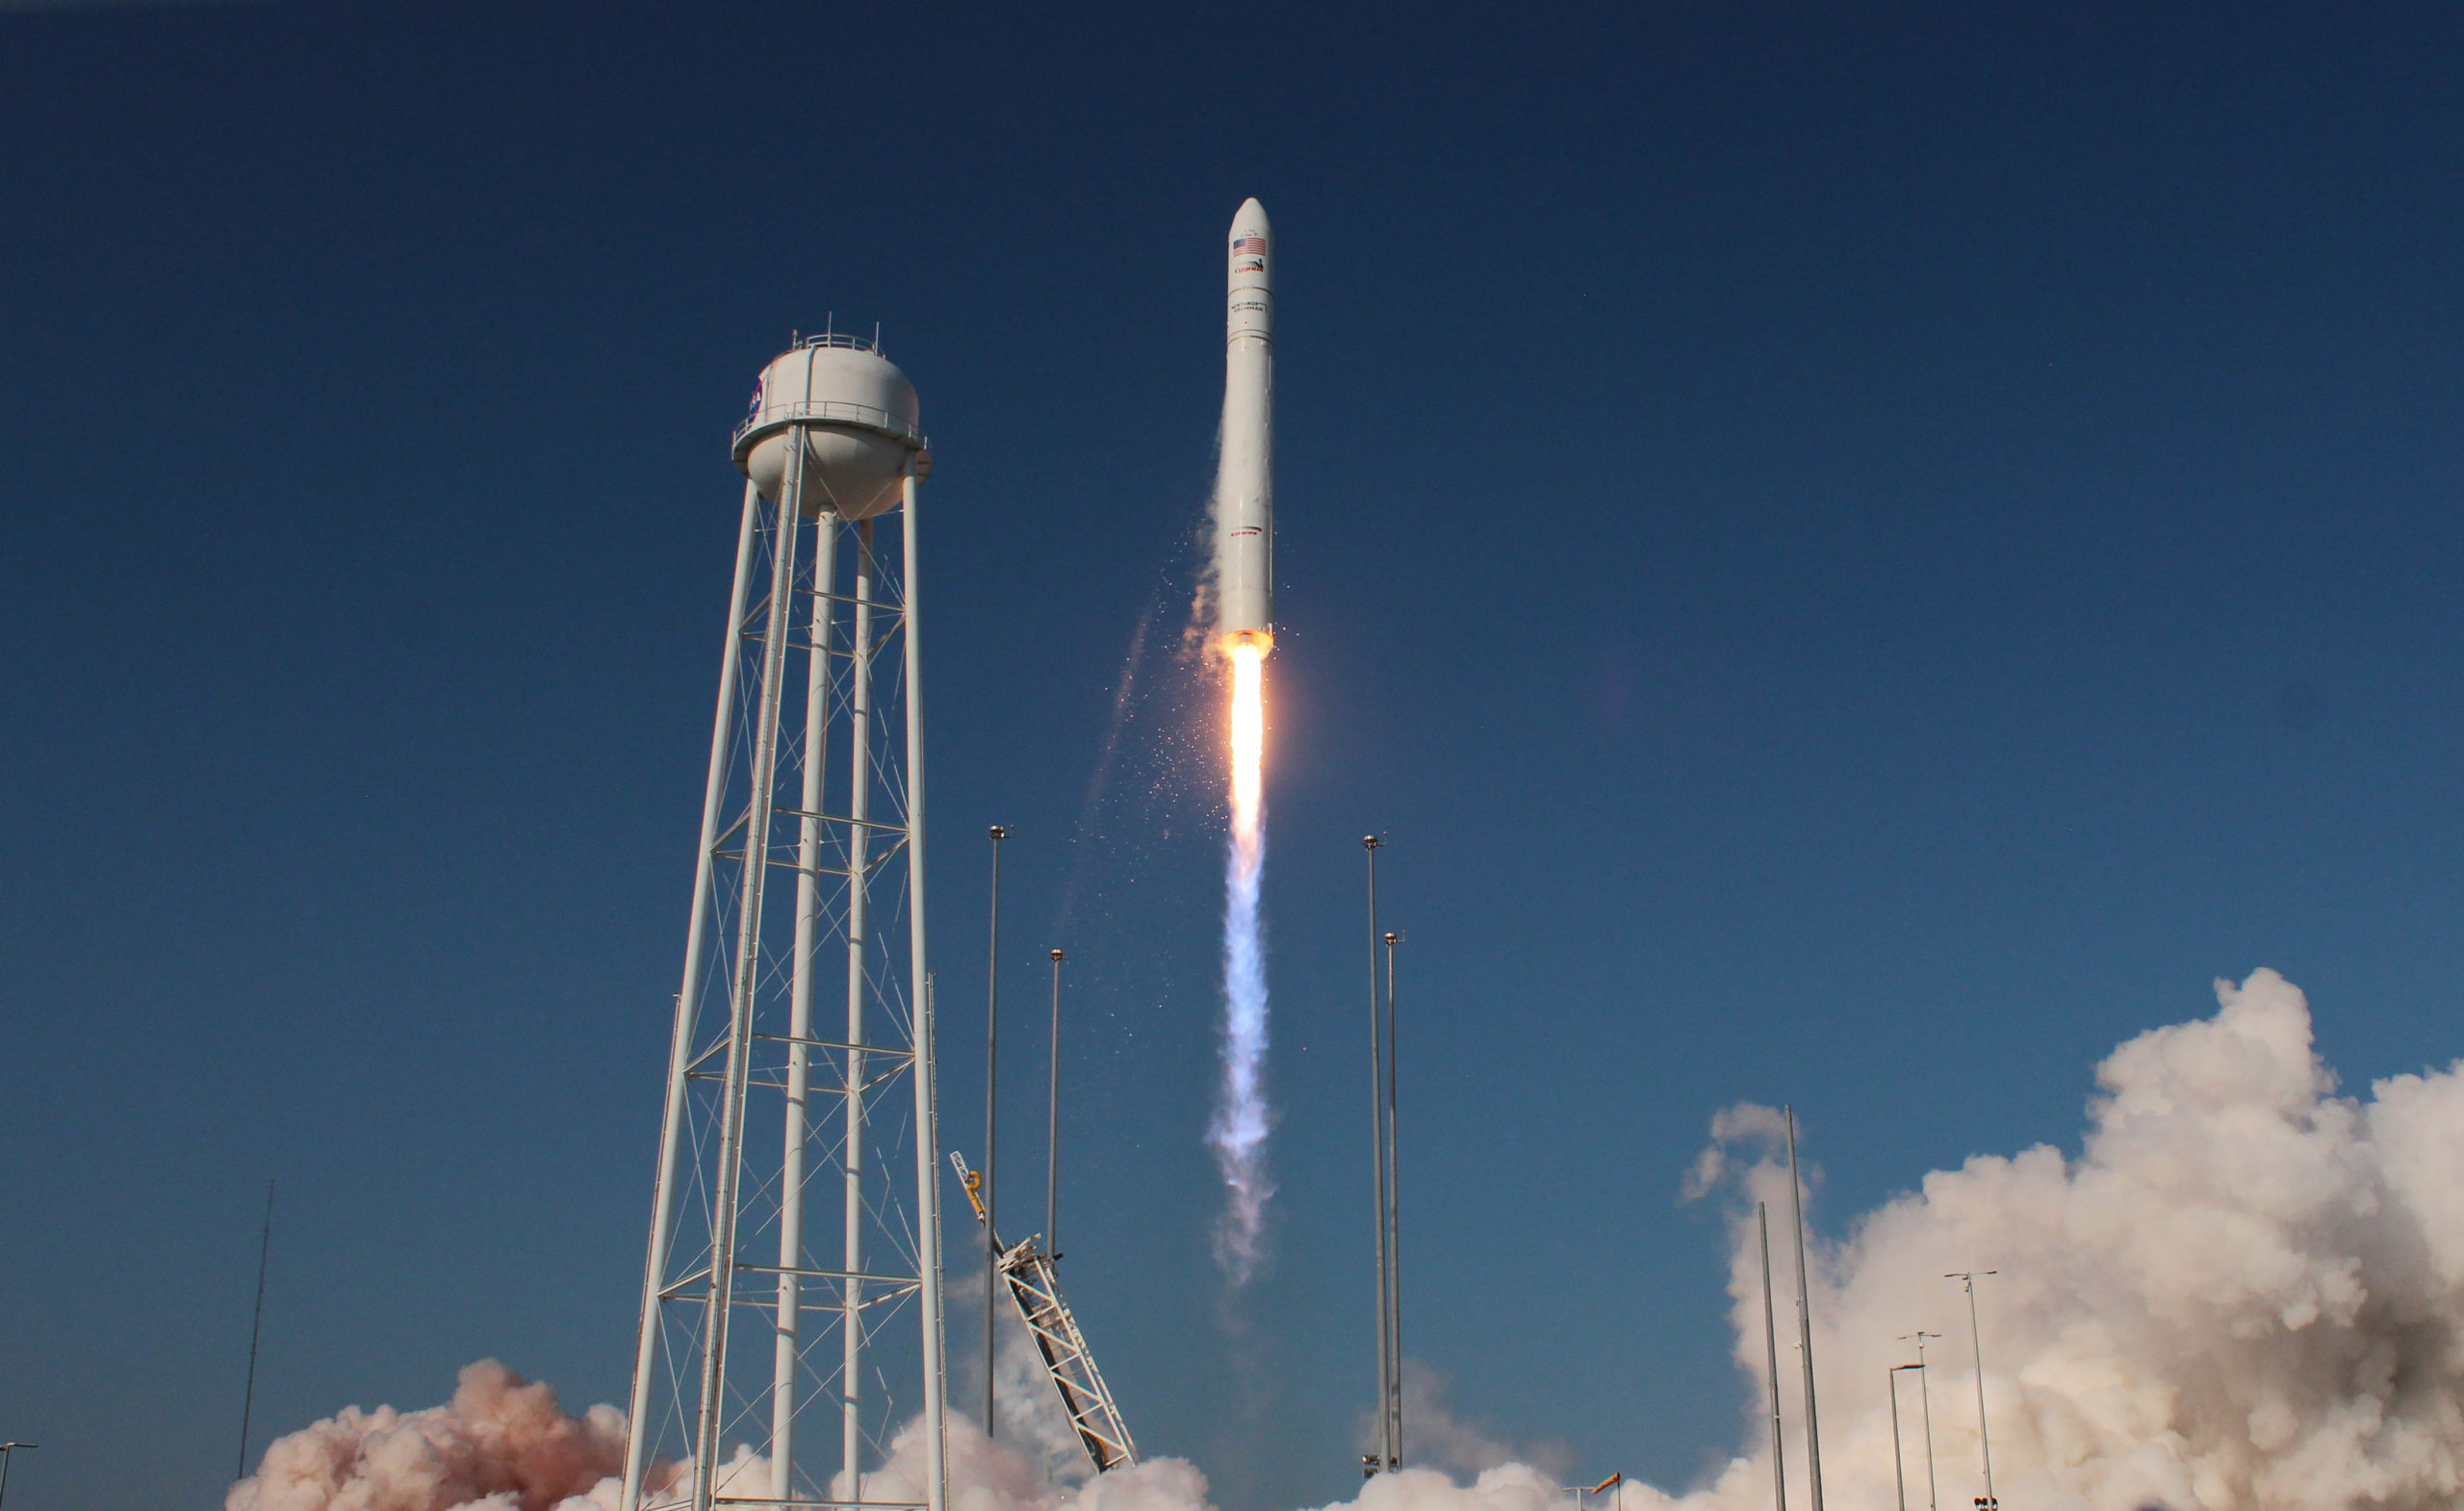 antares rocket soars into sky during launch from wallops island, virginia